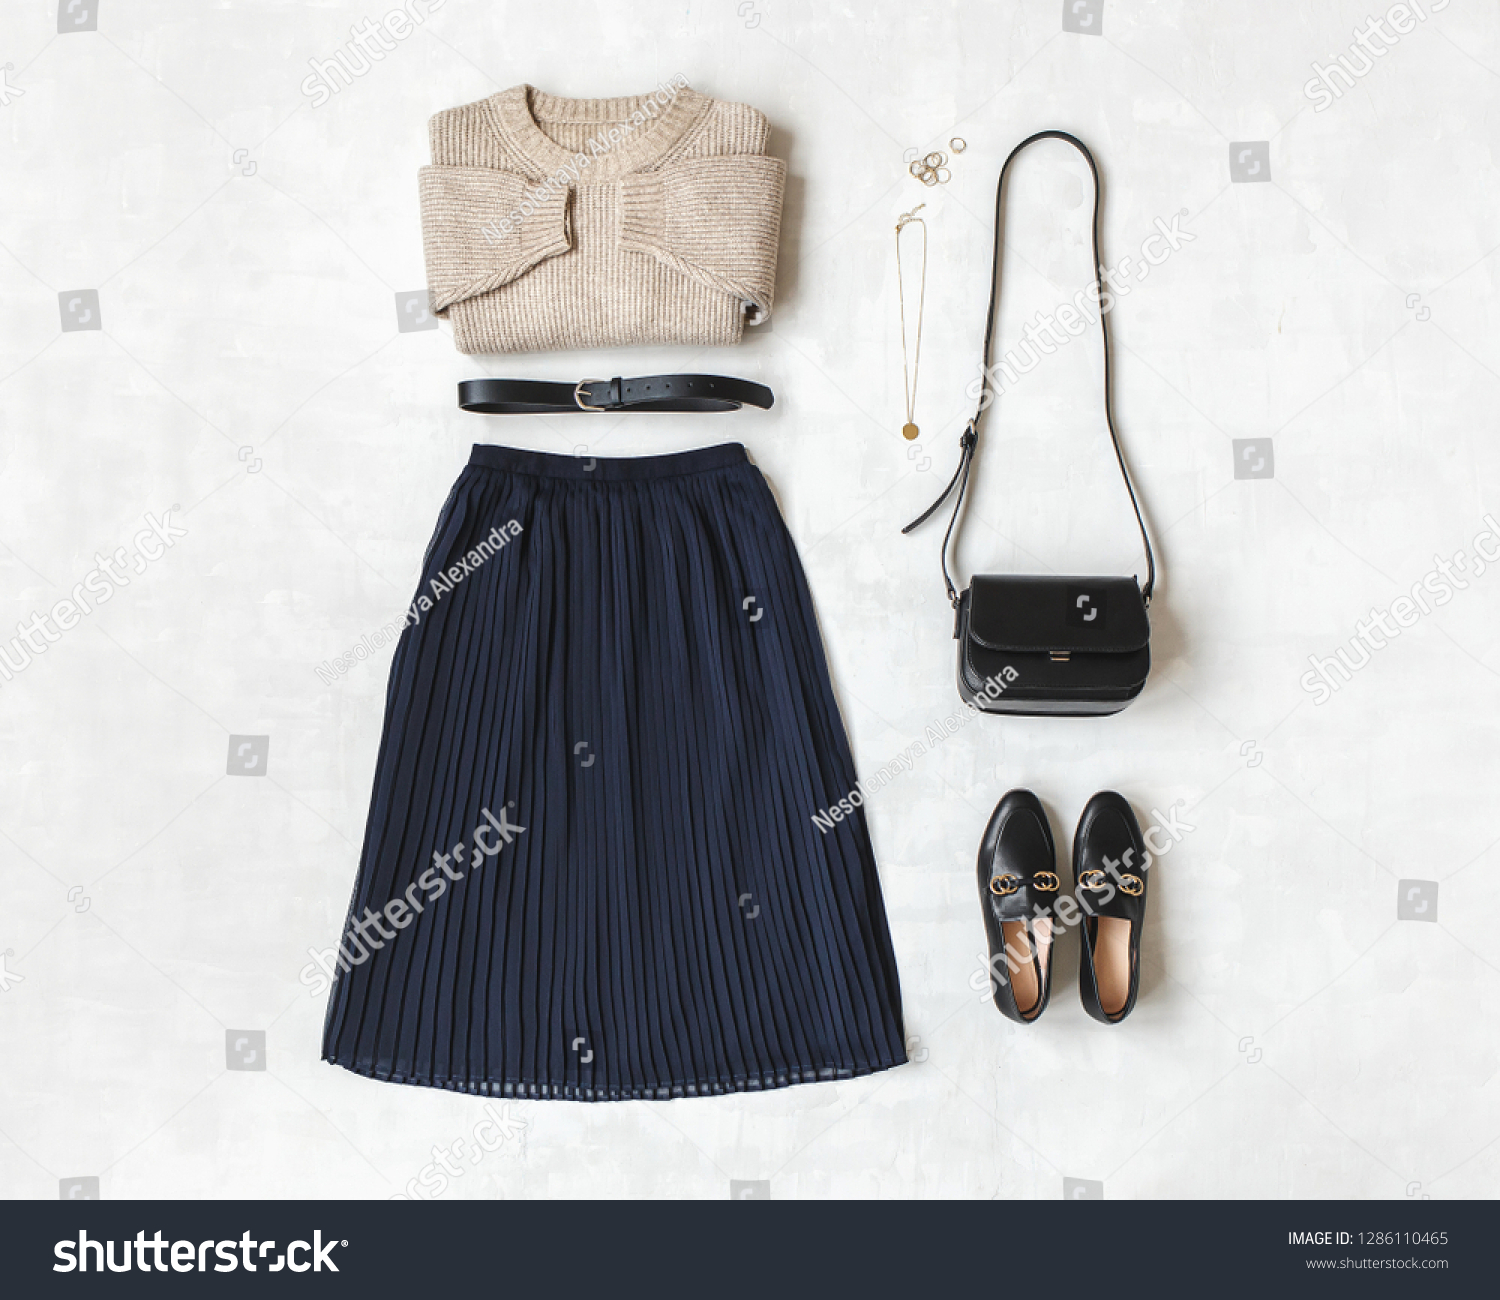 Blue midi pleated skirt, beige knitted sweater, small black cross body bag, belt, loafers (flat shoes) on grey background. Overhead view of women's casual day outfit. Flat lay, top view. Women clothes #1286110465